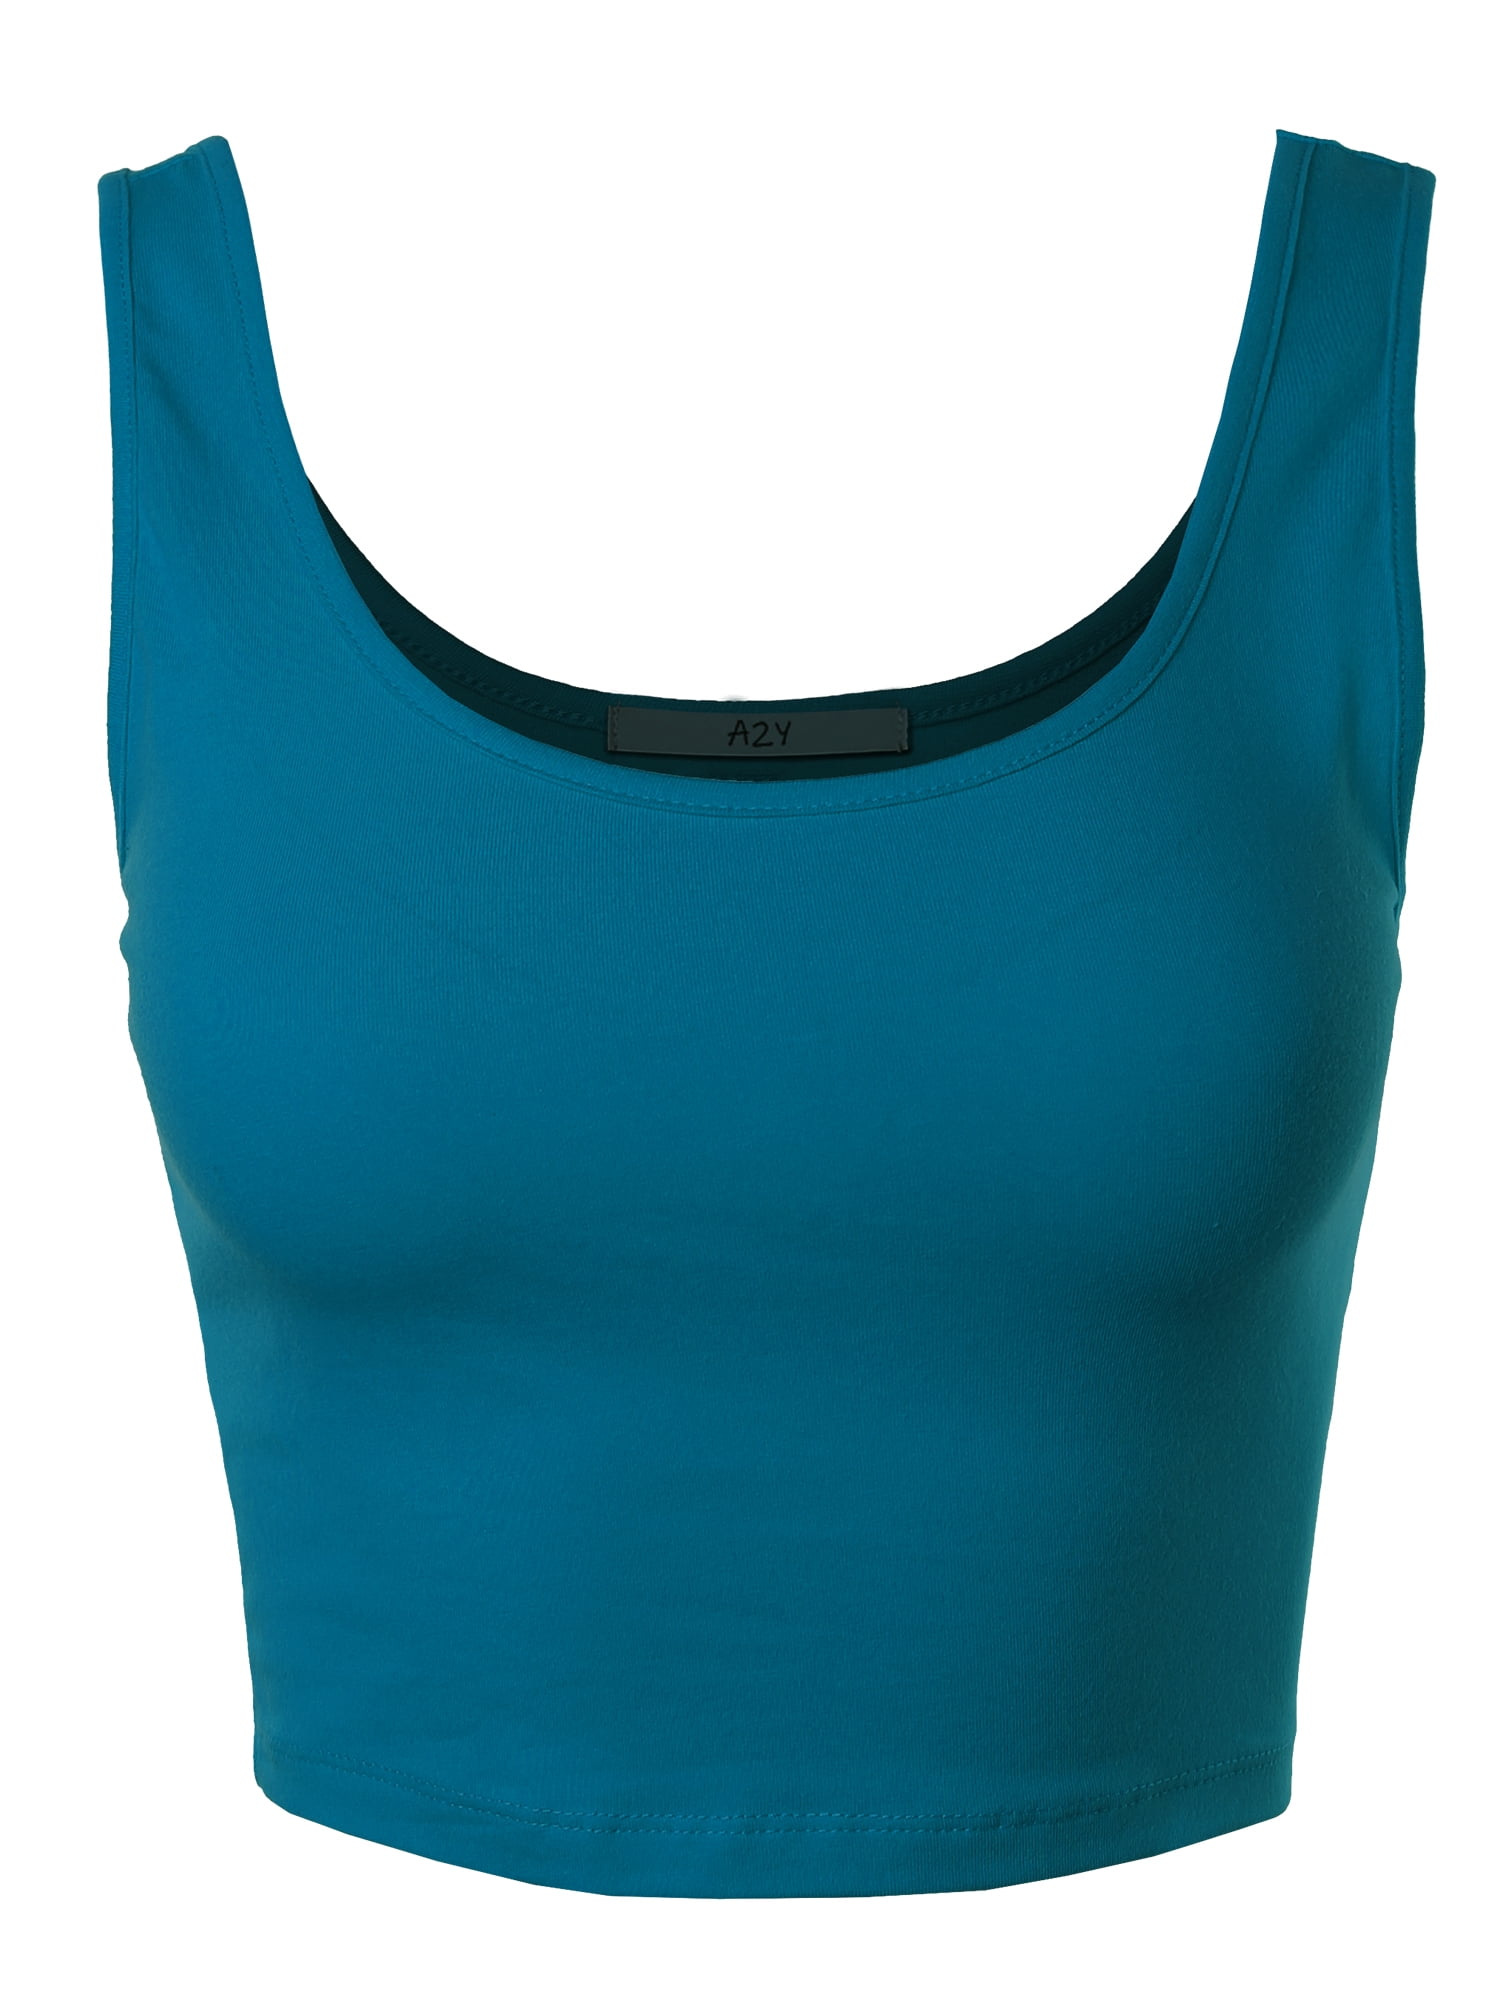 A2Y Women's Fitted Cotton Scoop Neck Sleeveless Crop Tank Top Turquoise M